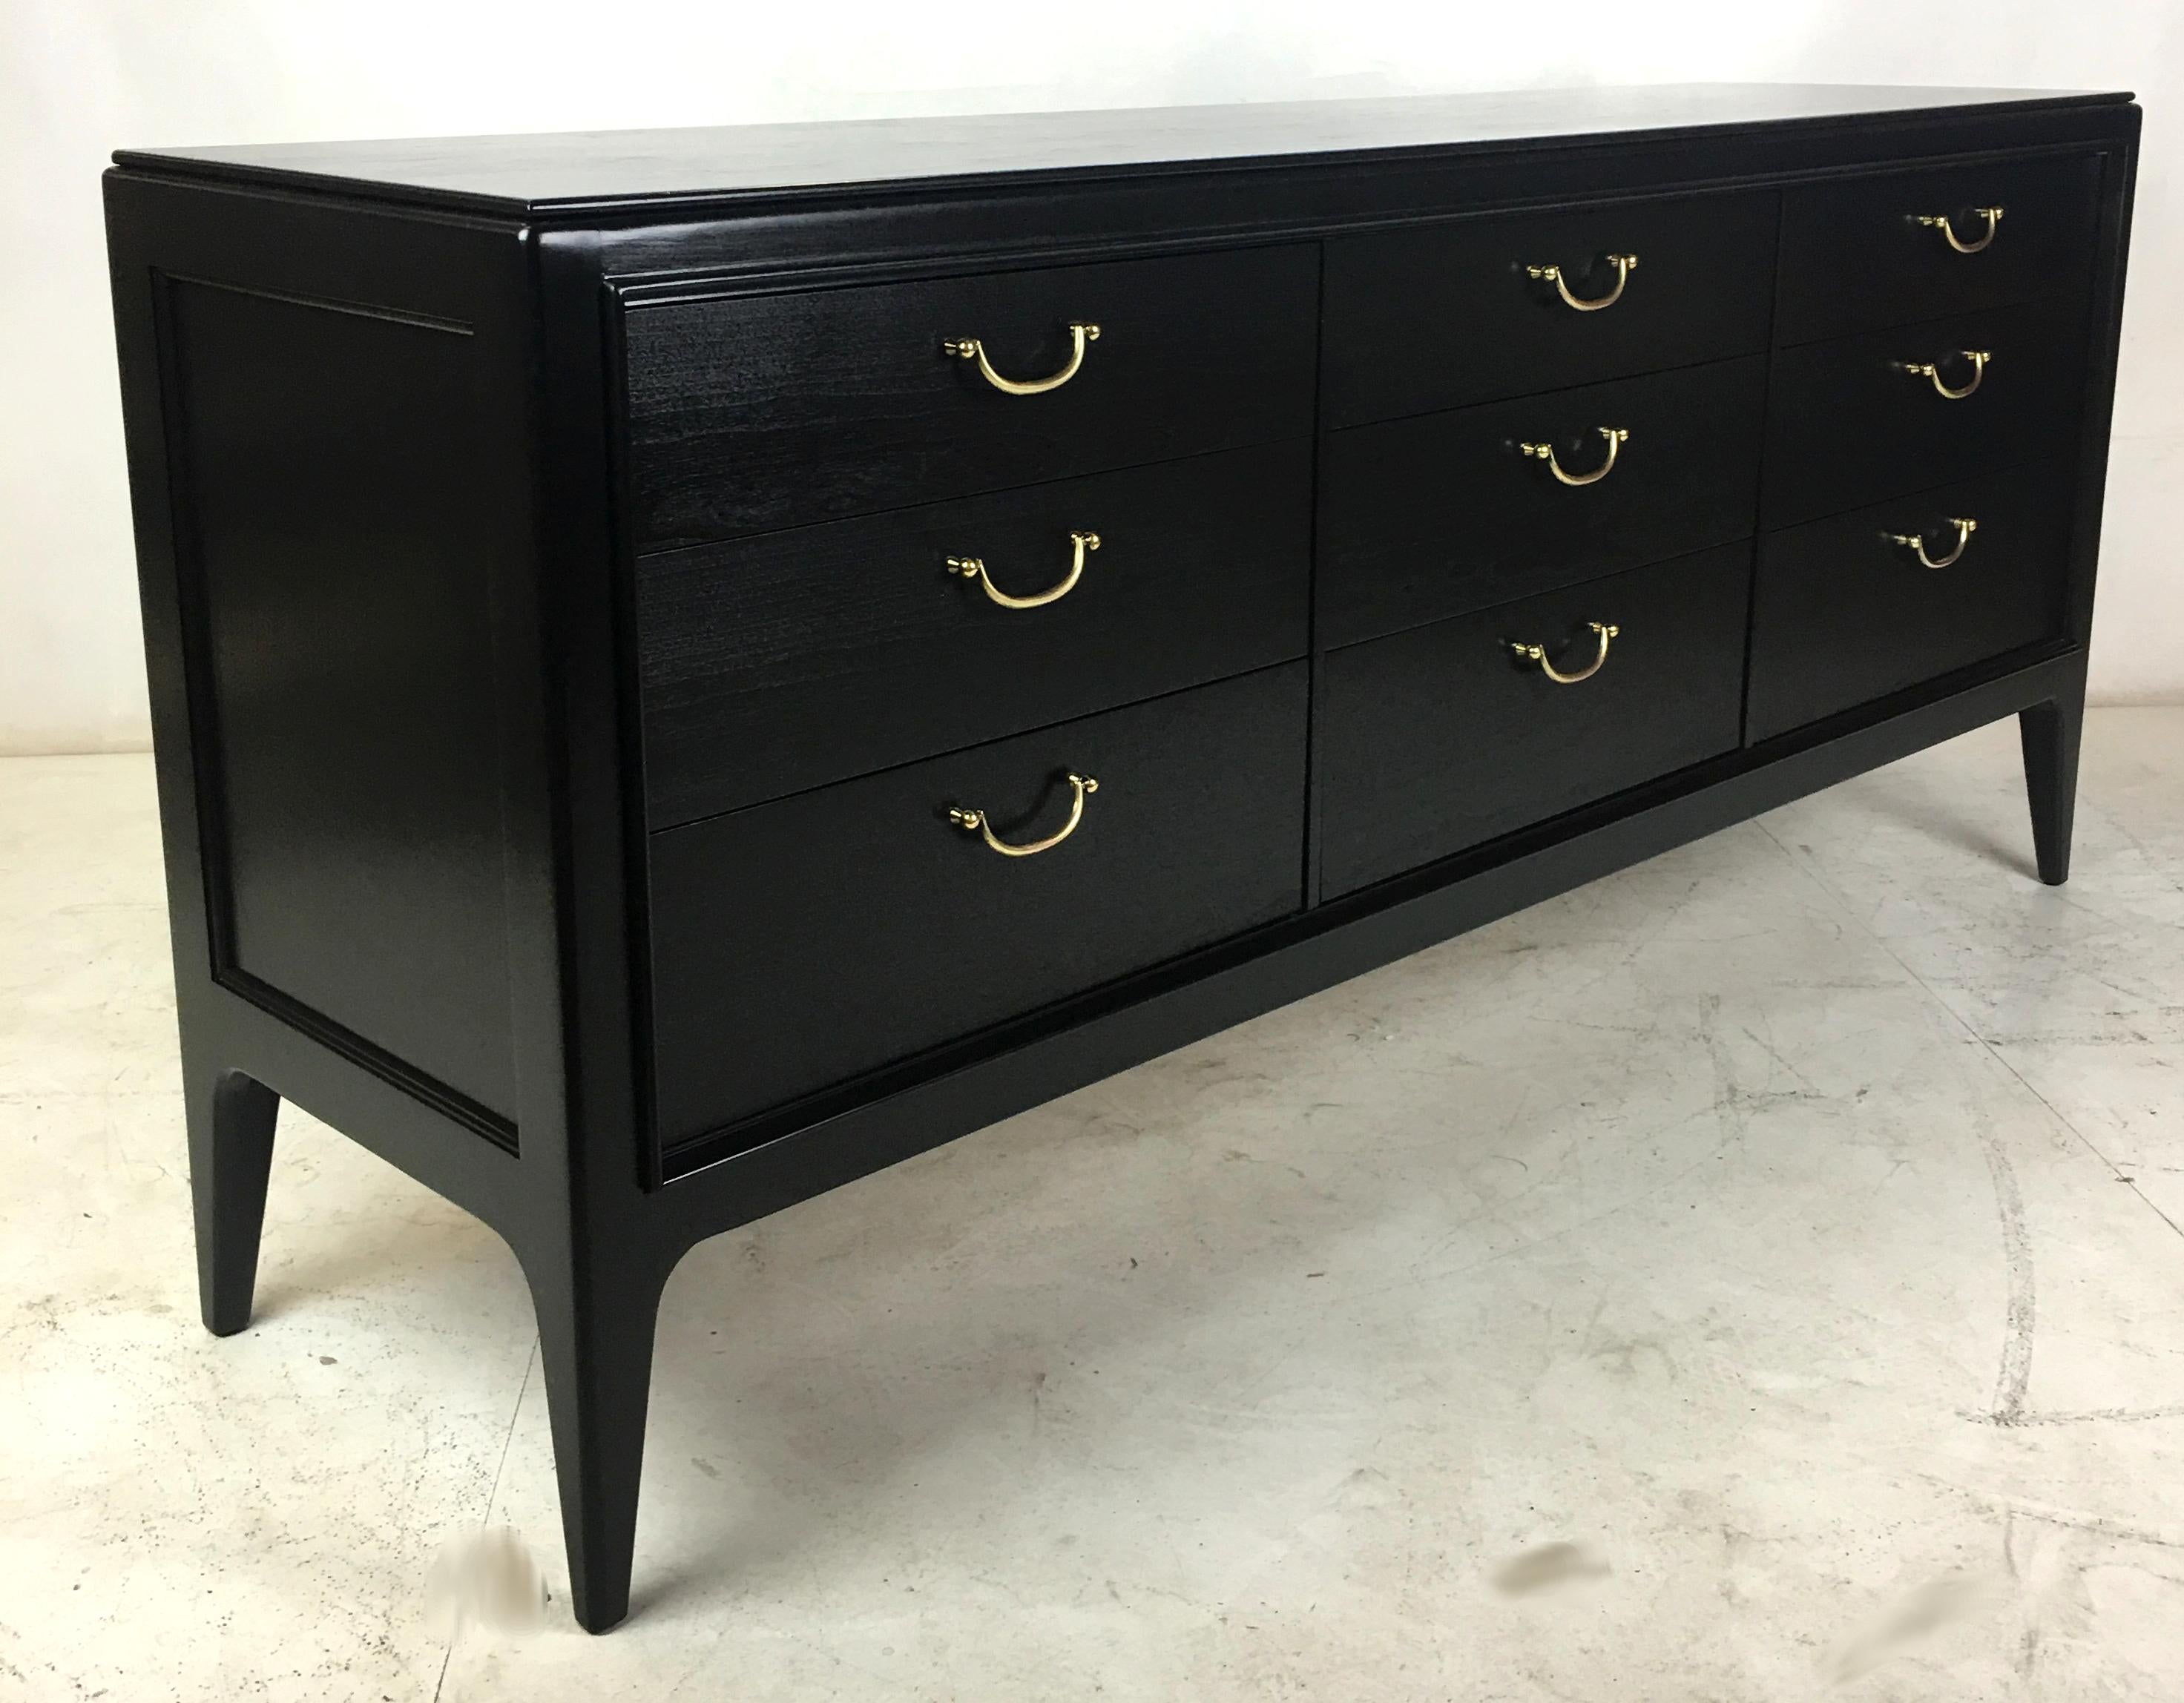 Handsome Neoclassical Modern nine-drawer dresser with tapered legs and brass bail pulls. The piece has been restored from the ground up and refinished in Ebony lacquer. The pulls were hand polished preserving just enough of their vintage patina.